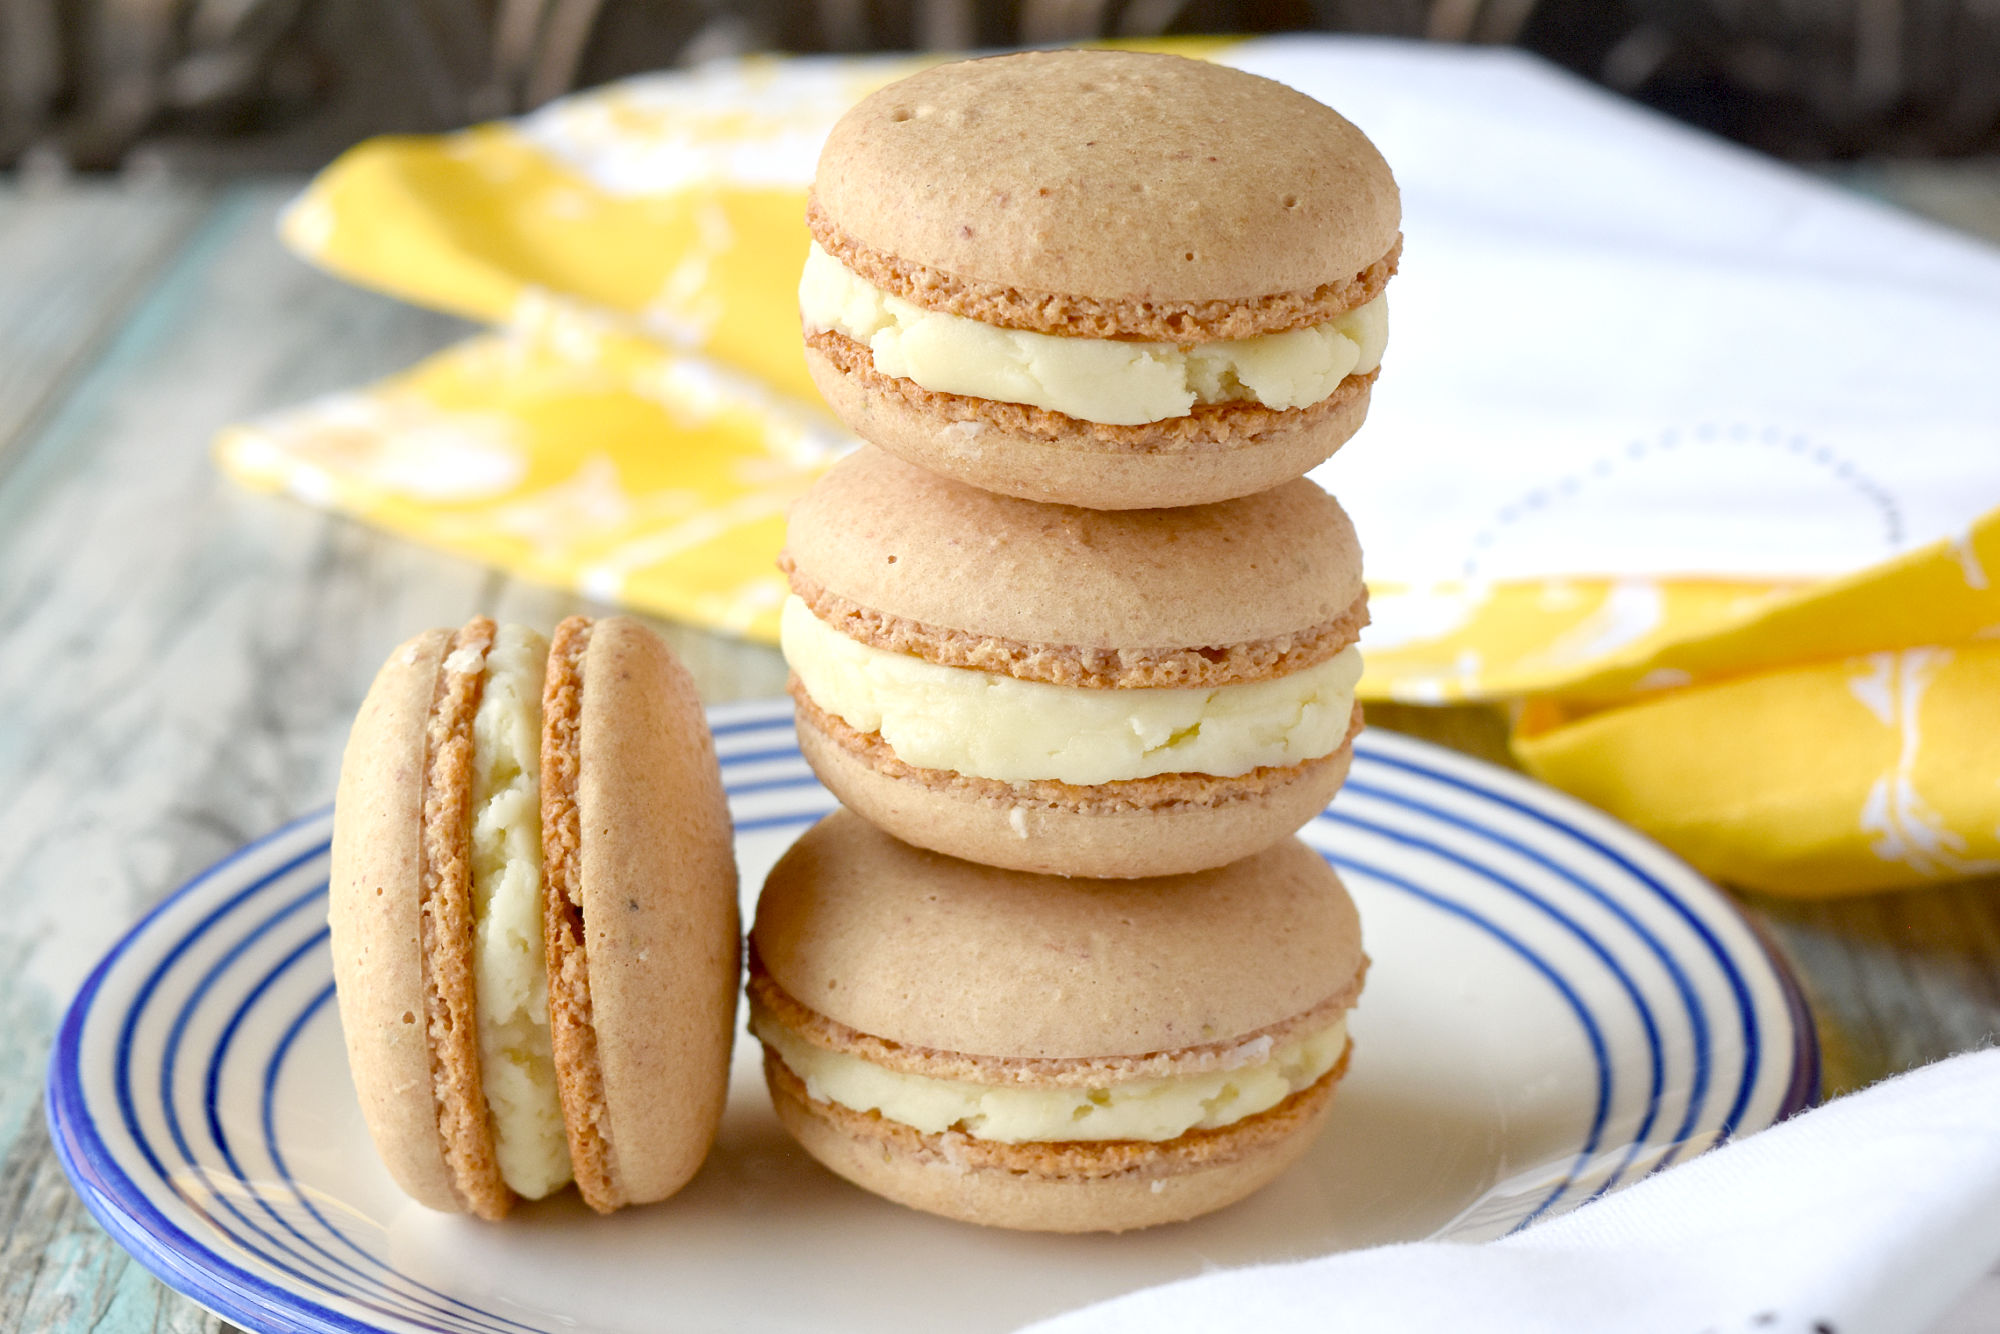 Strawberry Lemonade Macaron have the sweetness of strawberries in the shells and the tartness of lemons in the buttercream. They taste like the delicious summertime drink in a macaron. #BrunchWeek